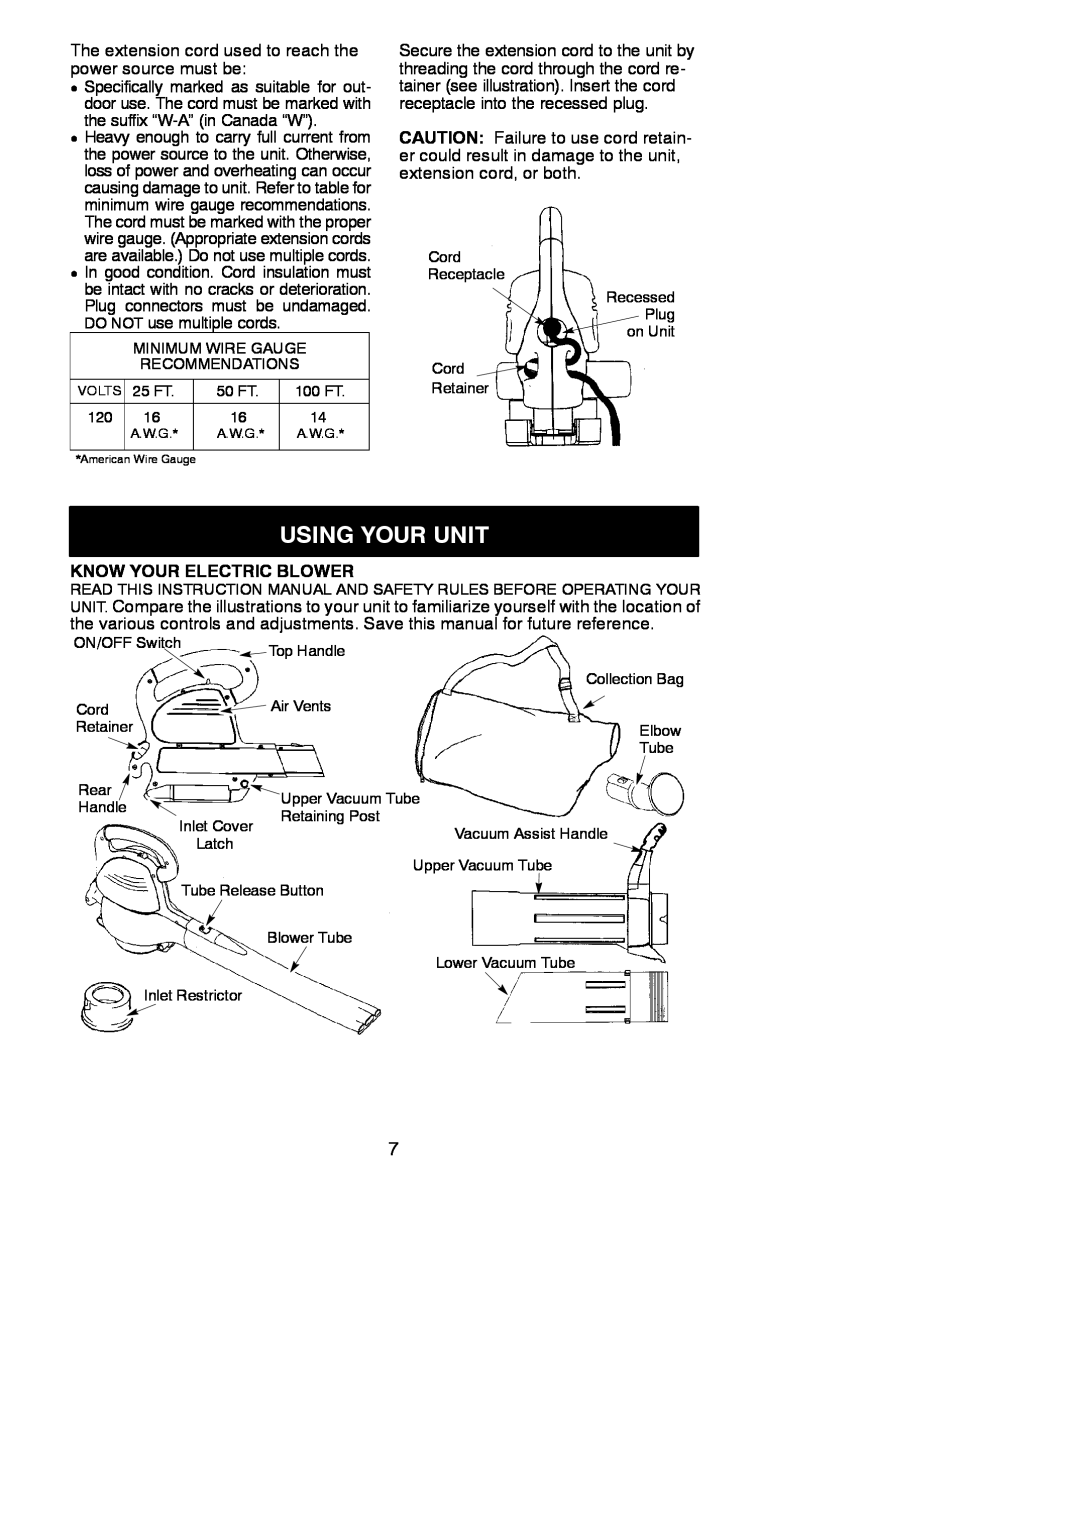 Weed Eater 545117534, EBV 200 instruction manual Using Your Unit, Know Your Electric Blower 